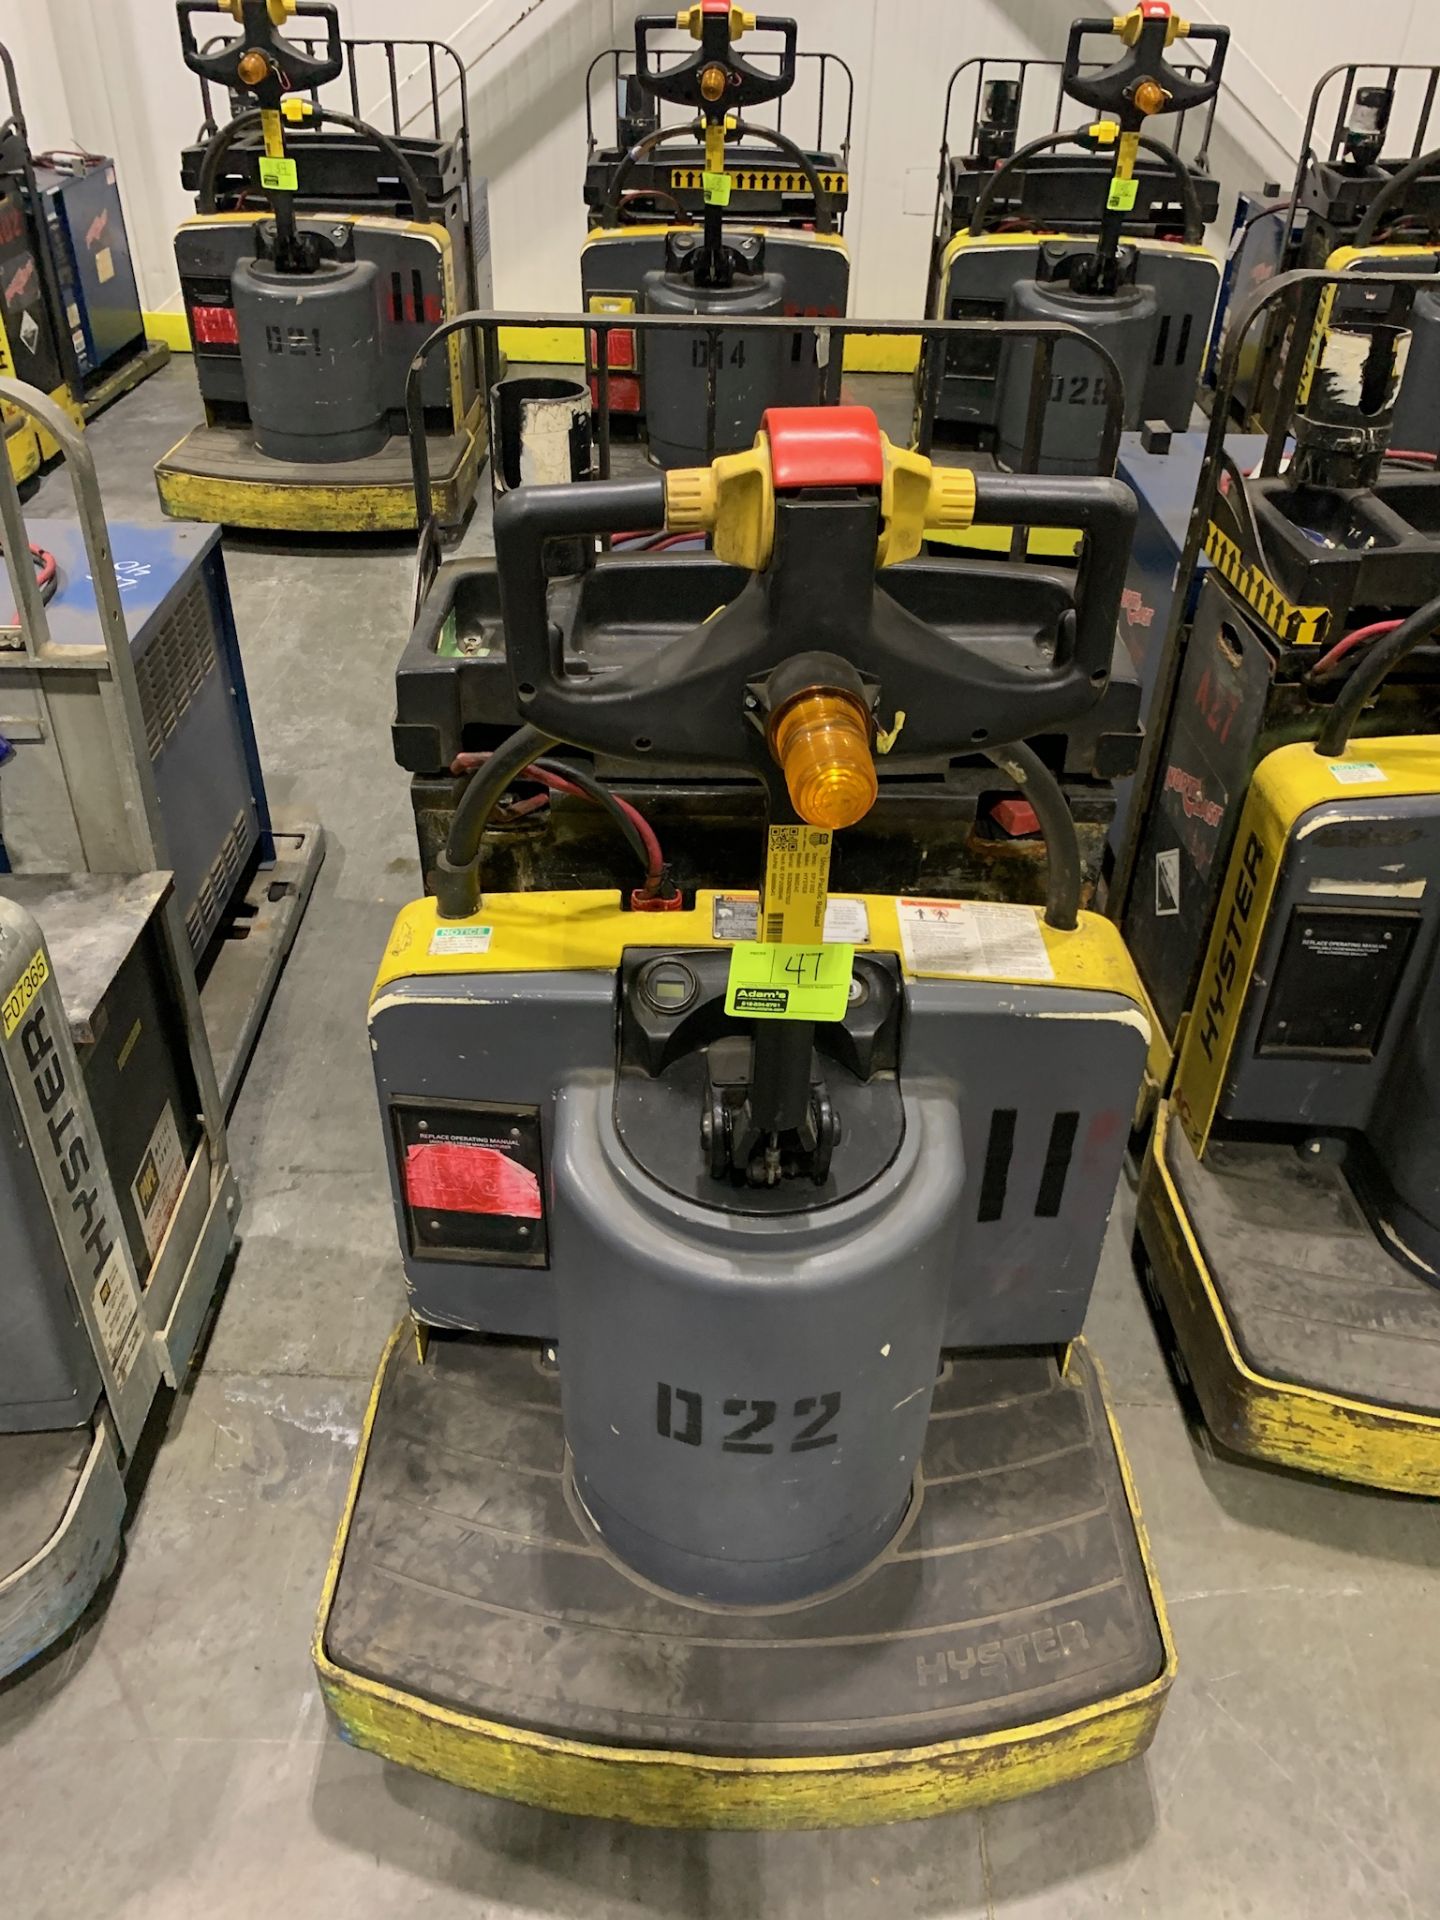 Hyster pallet jack with batter and charger; 7630 HOURS